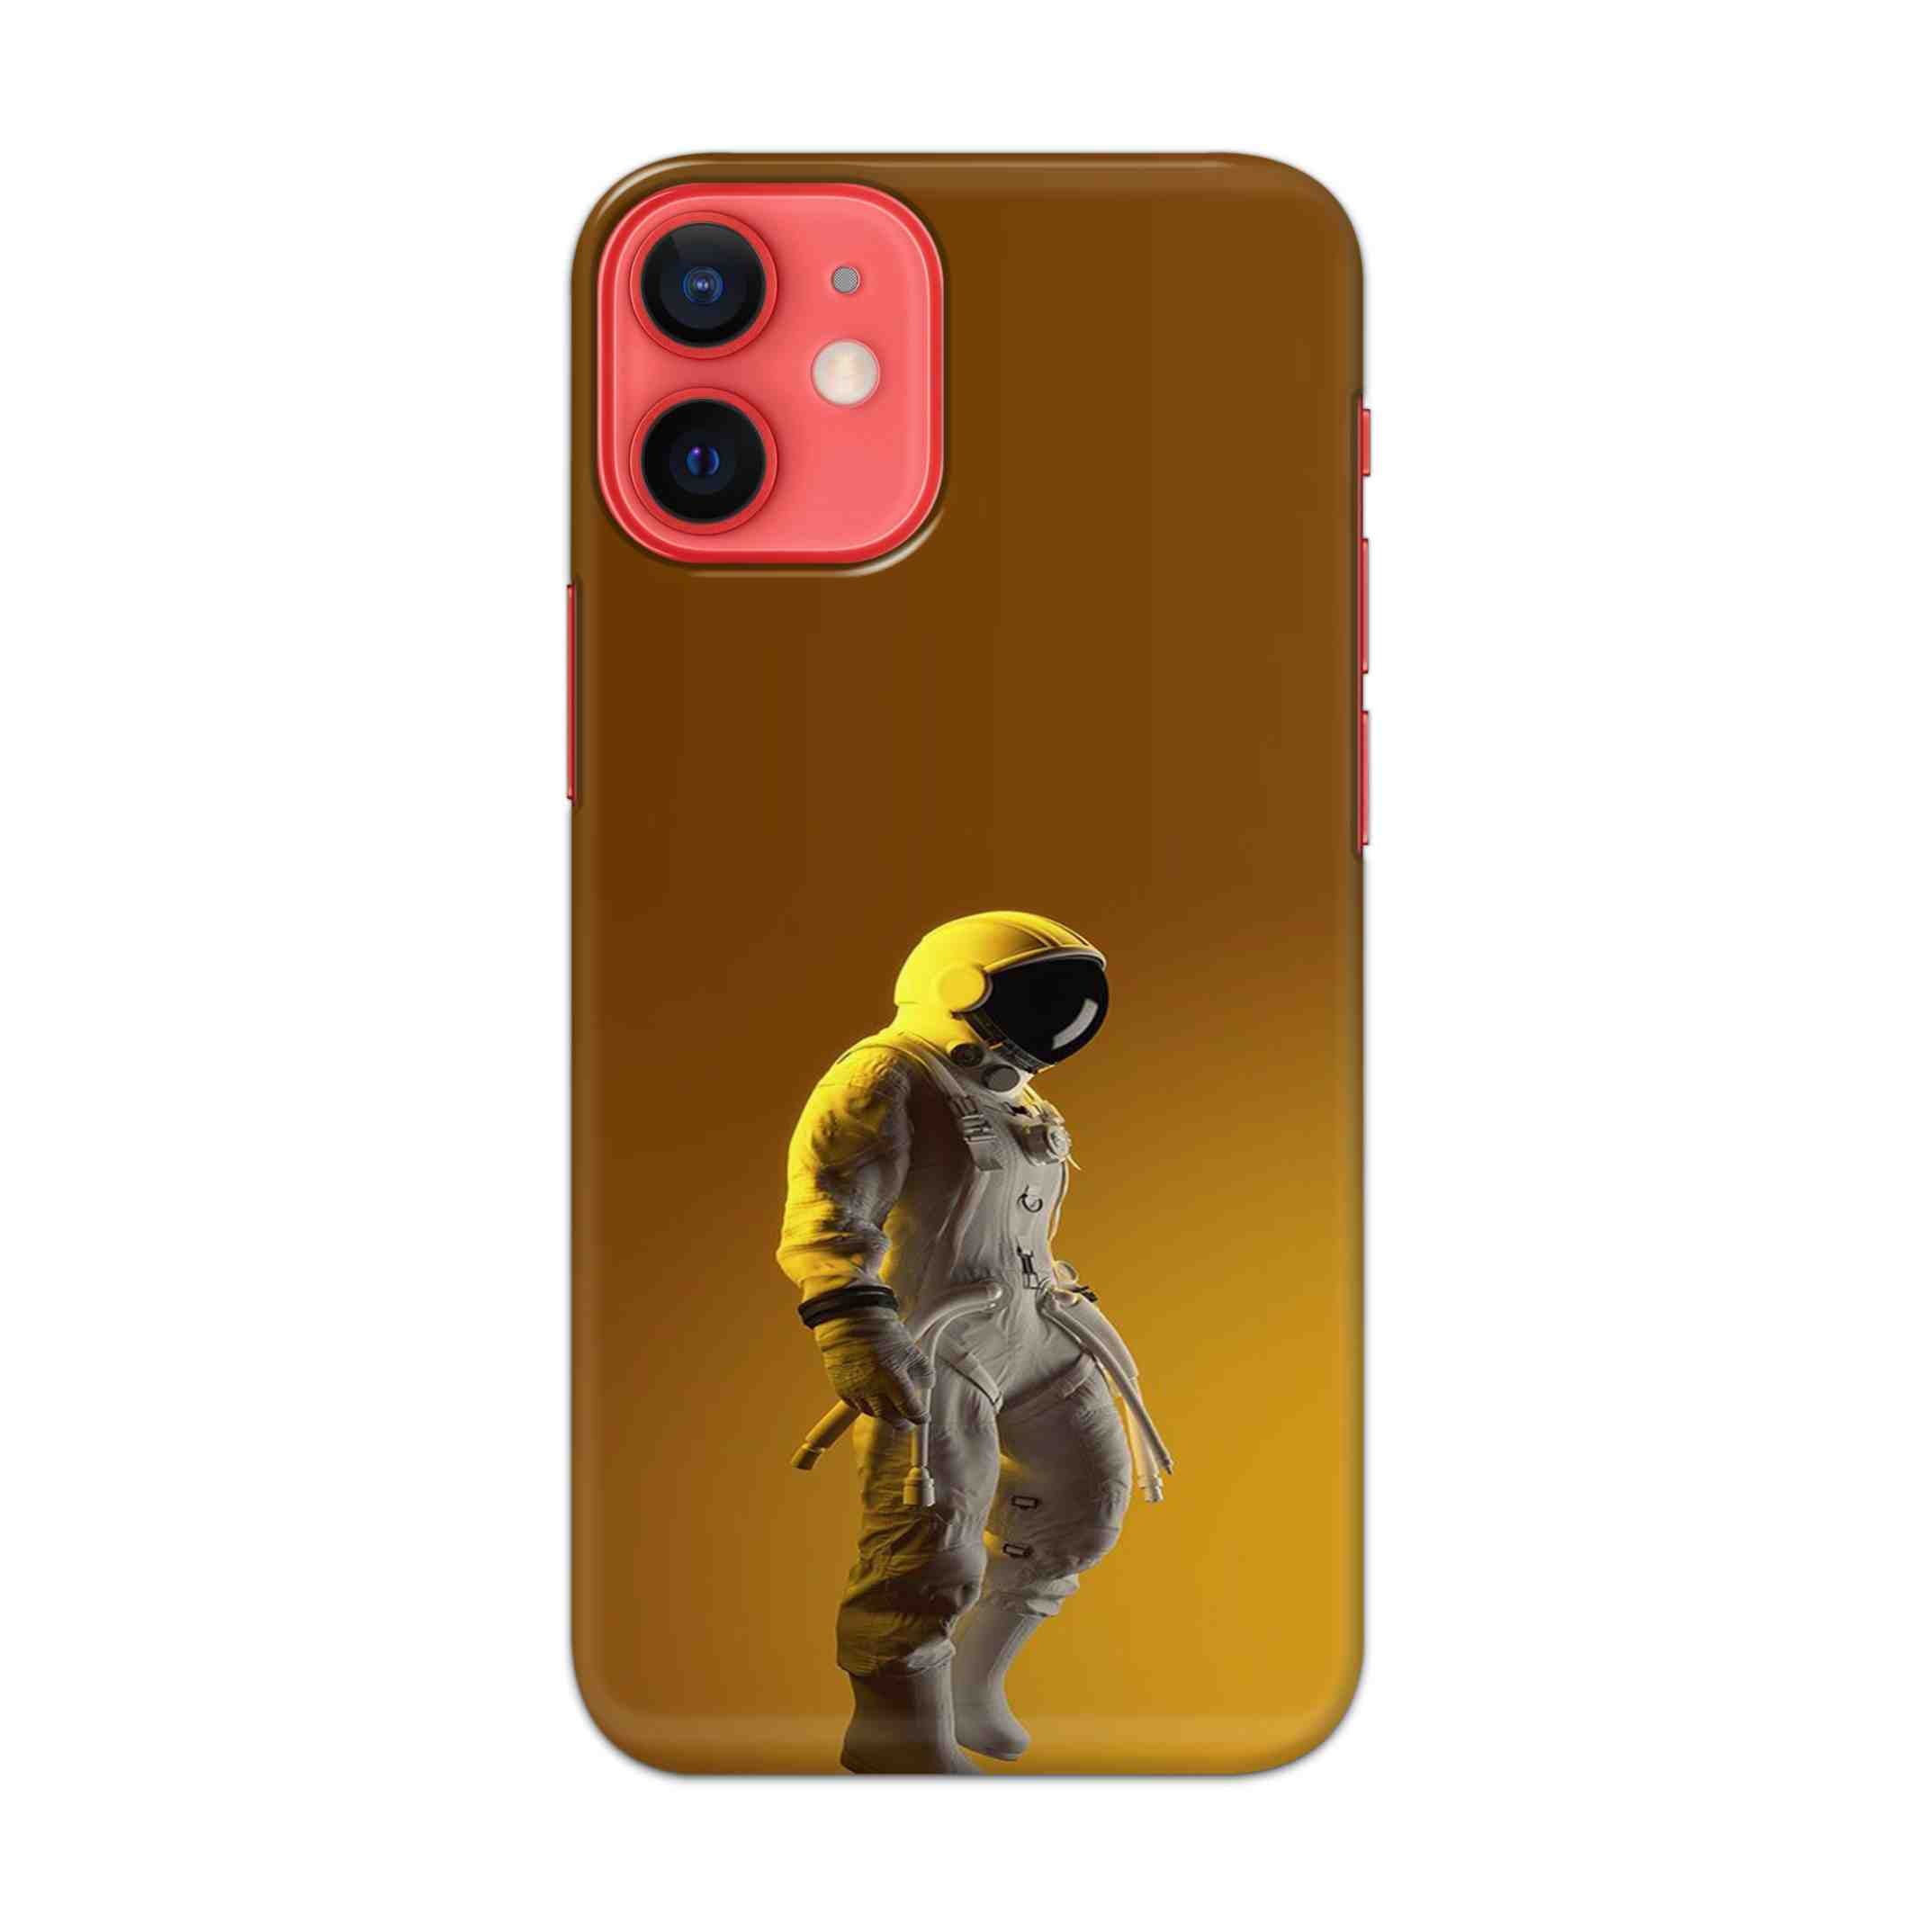 Buy Yellow Astranaut Hard Back Mobile Phone Case/Cover For Apple iPhone 12 mini Online